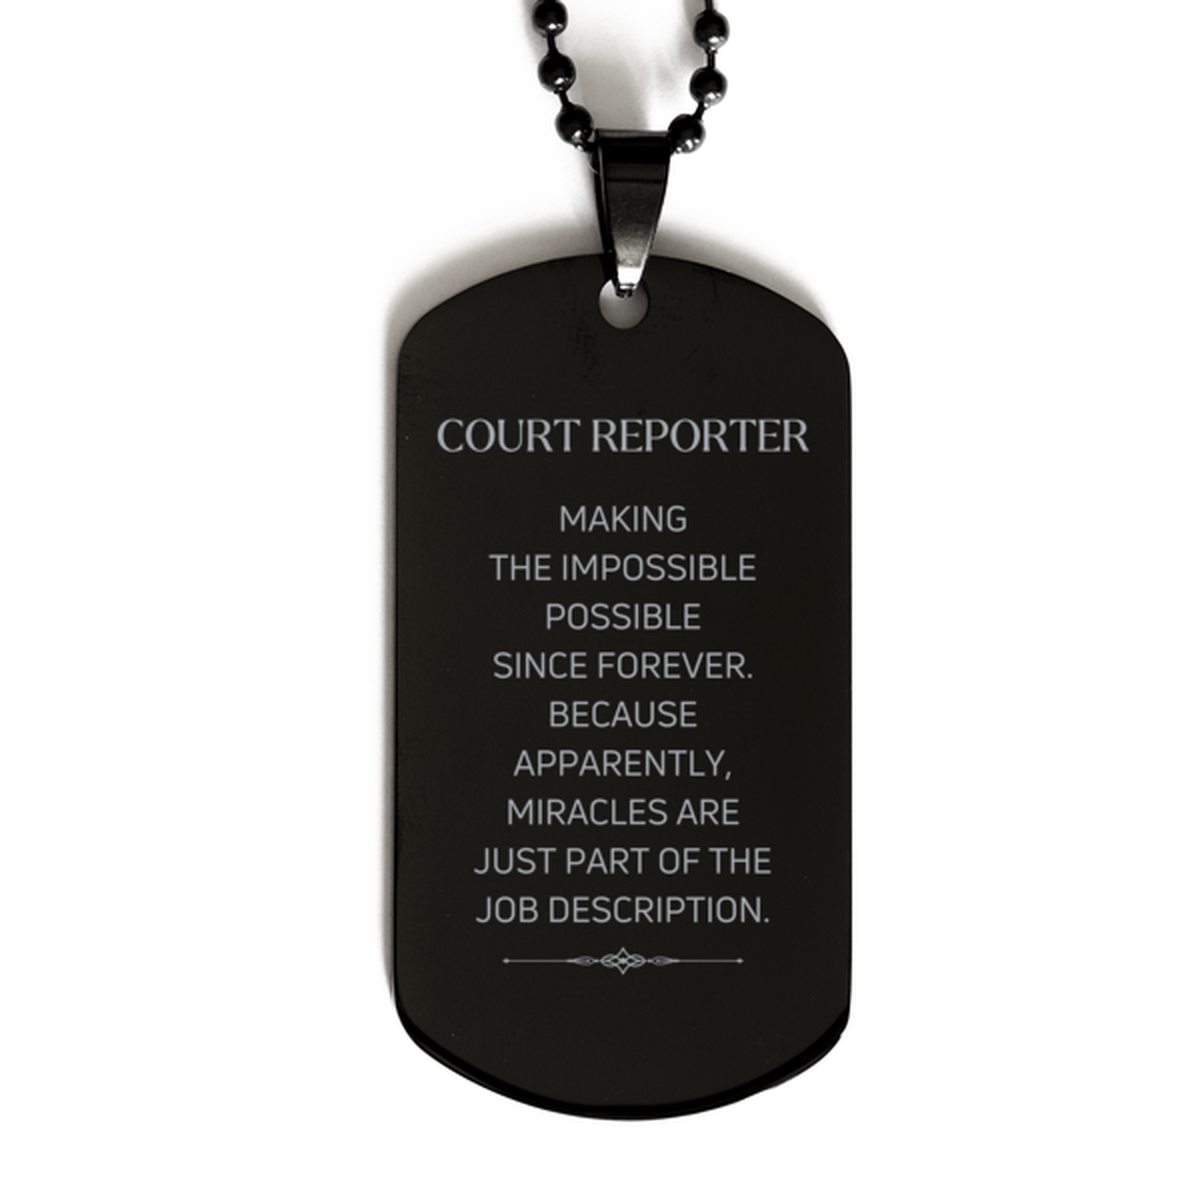 Funny Court Reporter Gifts, Miracles are just part of the job description, Inspirational Birthday Black Dog Tag For Court Reporter, Men, Women, Coworkers, Friends, Boss